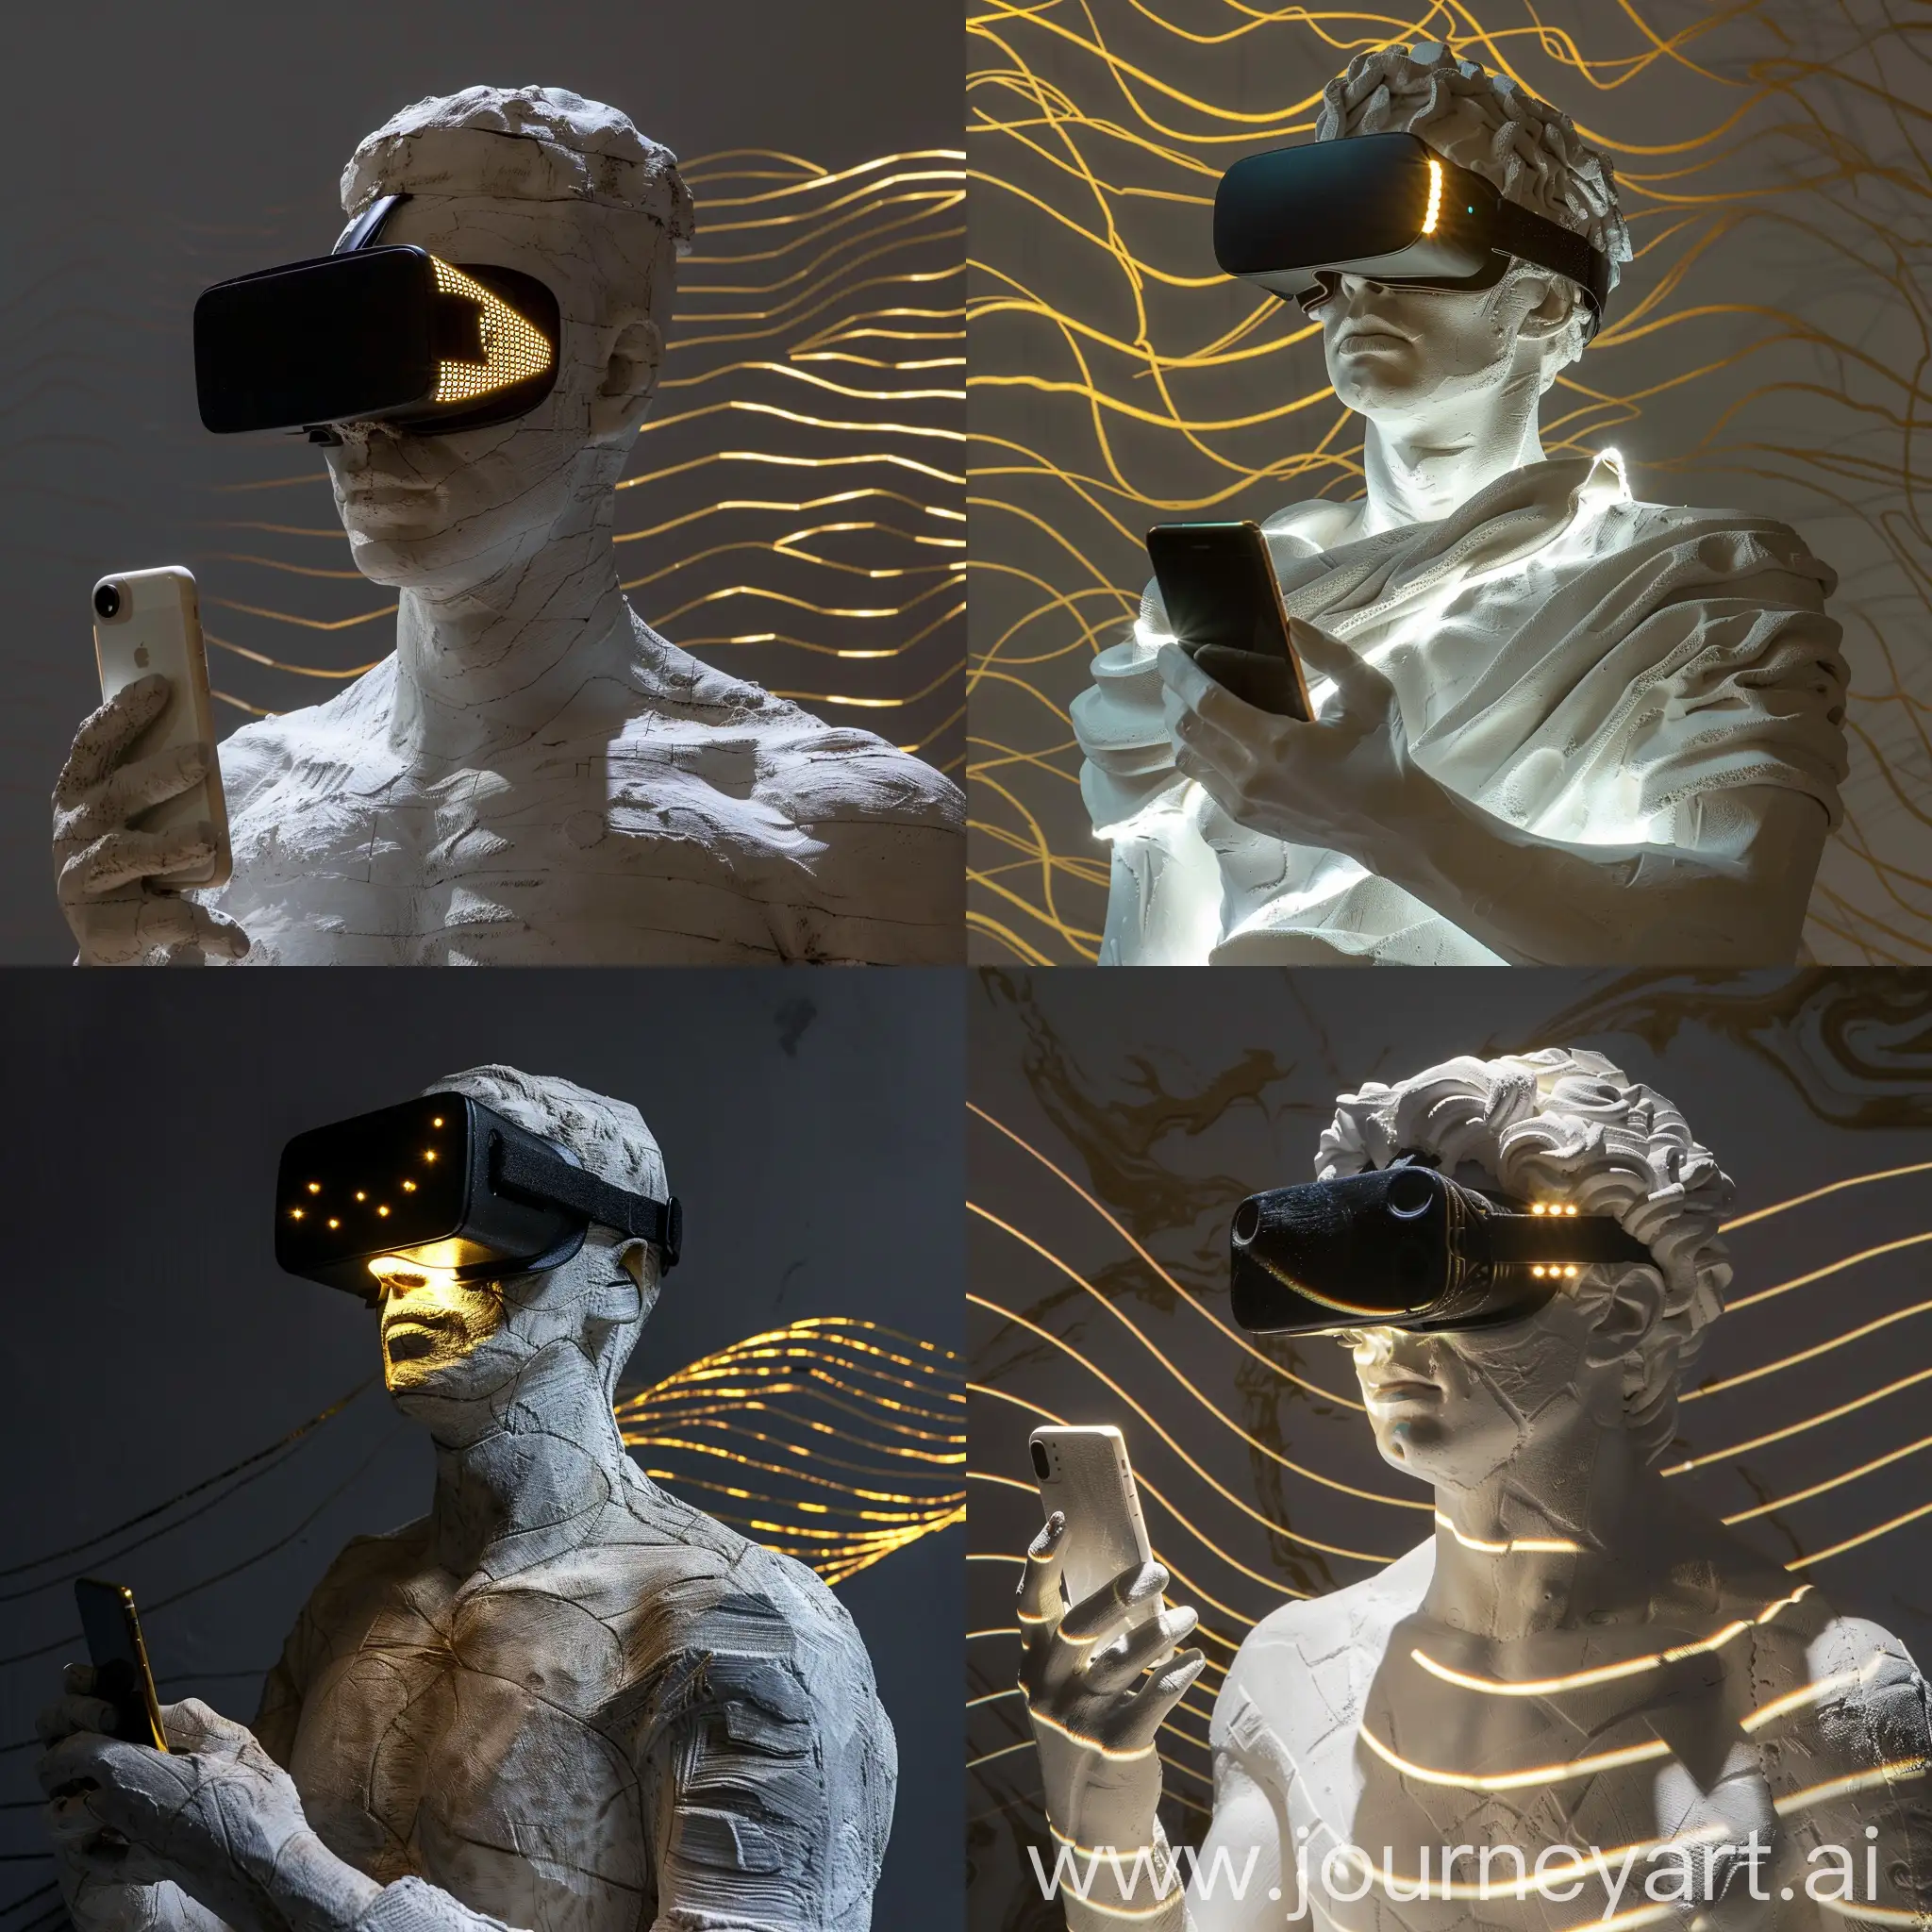 A Plaster Sculpture of a man, Black VR Glasses With Golden LED, Iphone in hand, White Light Reflections on Sculpture, Gold Techno Wave Pattern in Dark Background, Dreamy Pose, Medium Shot, High Precision --v 6.0